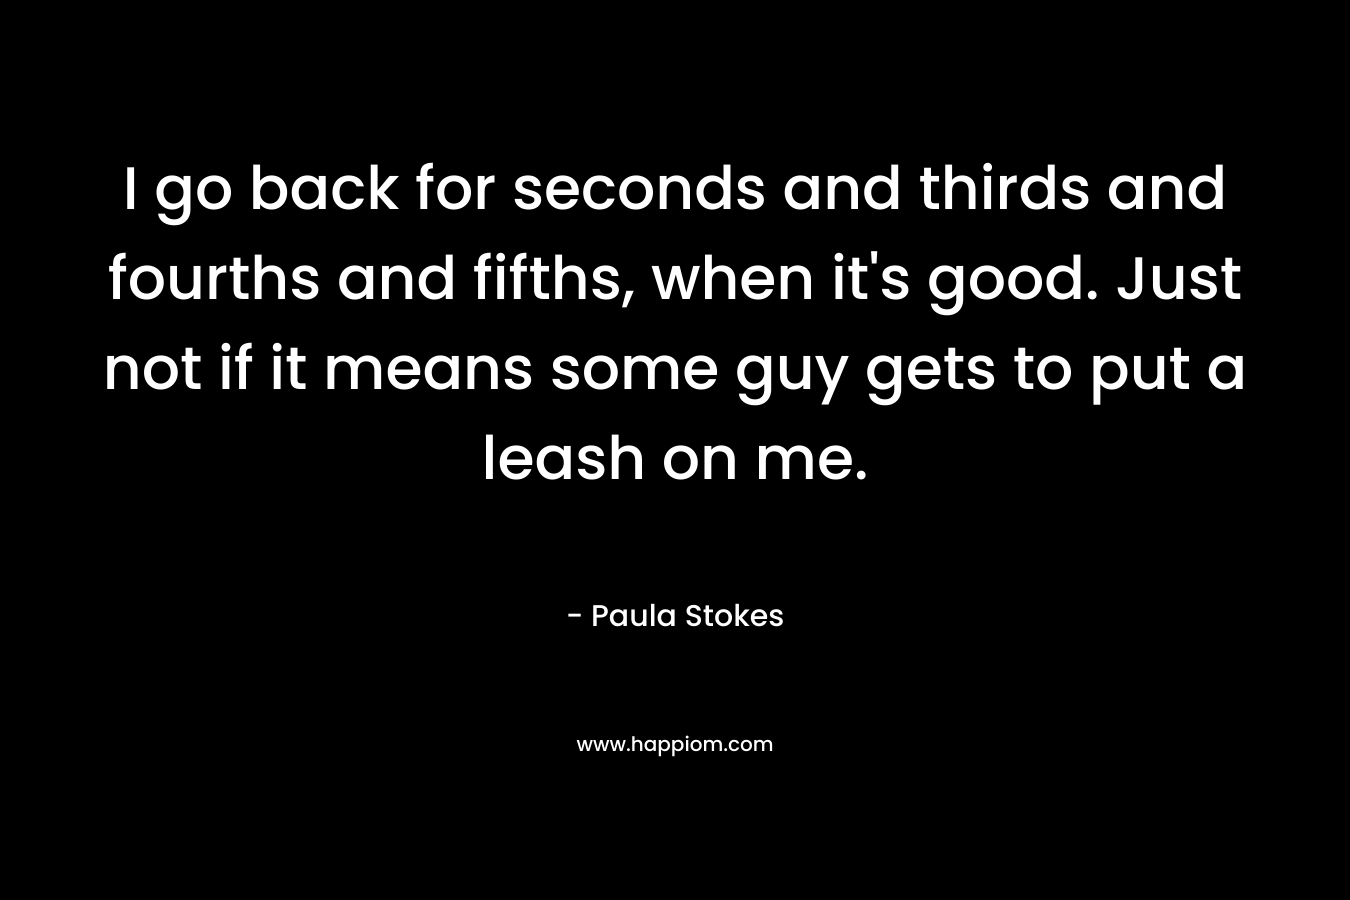 I go back for seconds and thirds and fourths and fifths, when it’s good. Just not if it means some guy gets to put a leash on me. – Paula Stokes